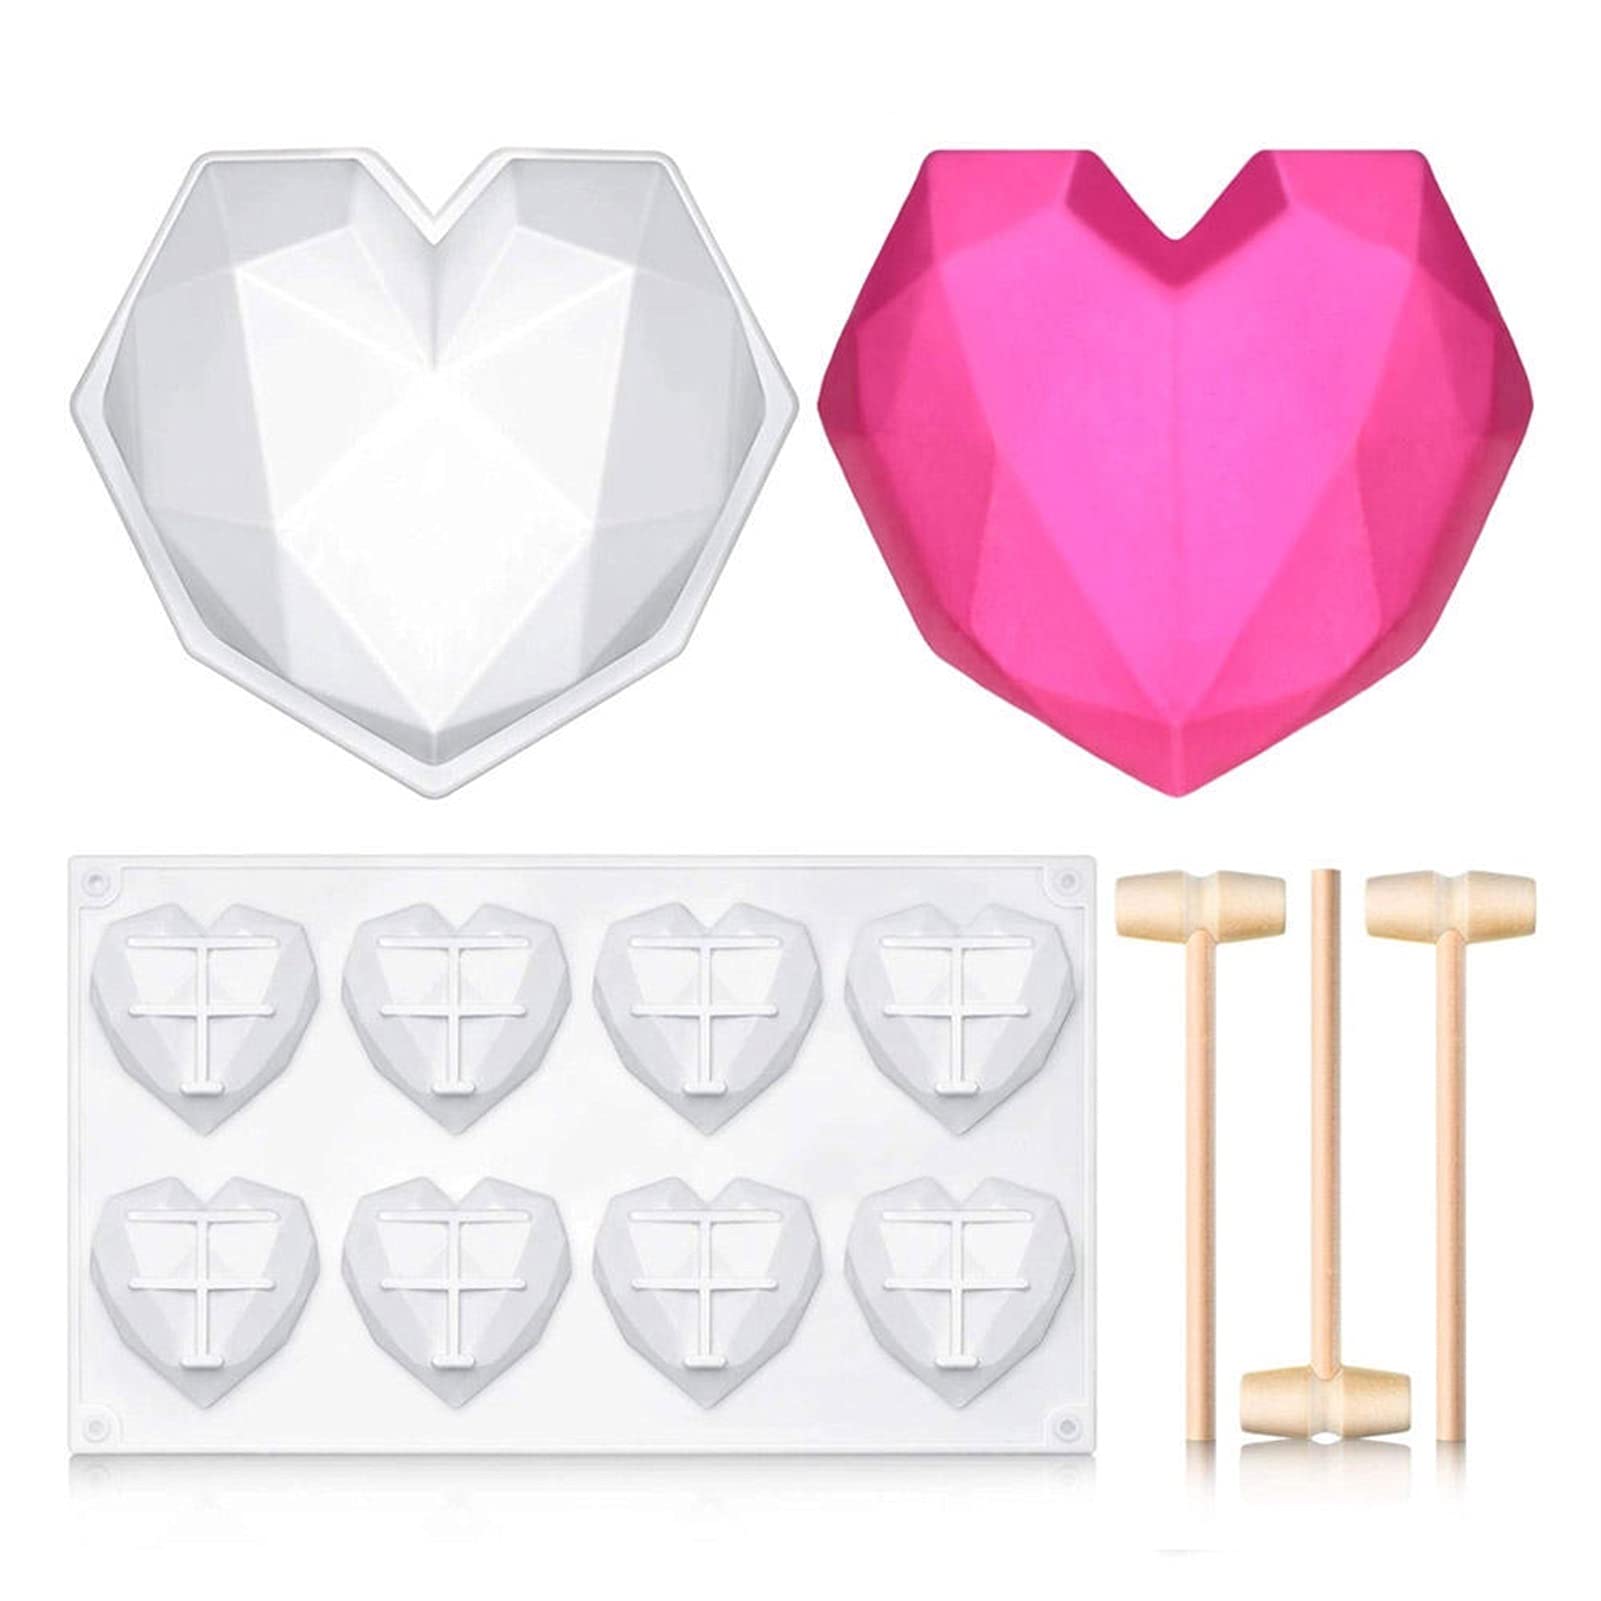 SRLIWHITE Heart Chocolate Mould 3D Heart Love Shape Silicone Cake Mould with Wooden Hammers Mallet Baking Accessories (Color : 5pc Set)